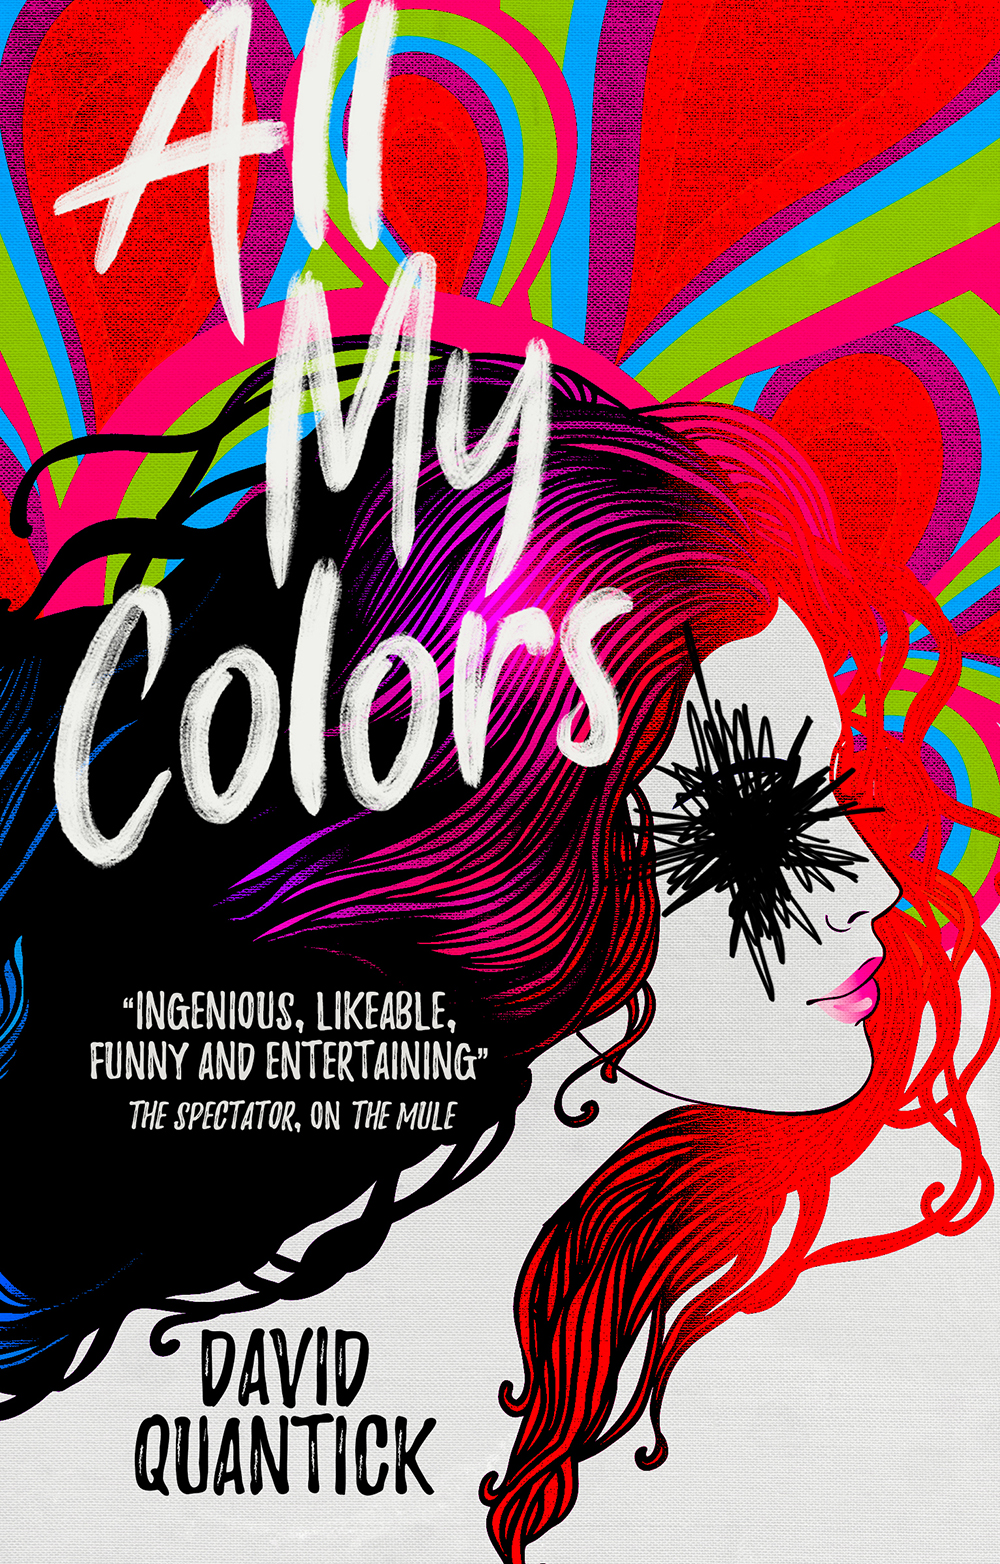 A Writer’s Rollercoaster Nightmare in <i>All My Colors</i>